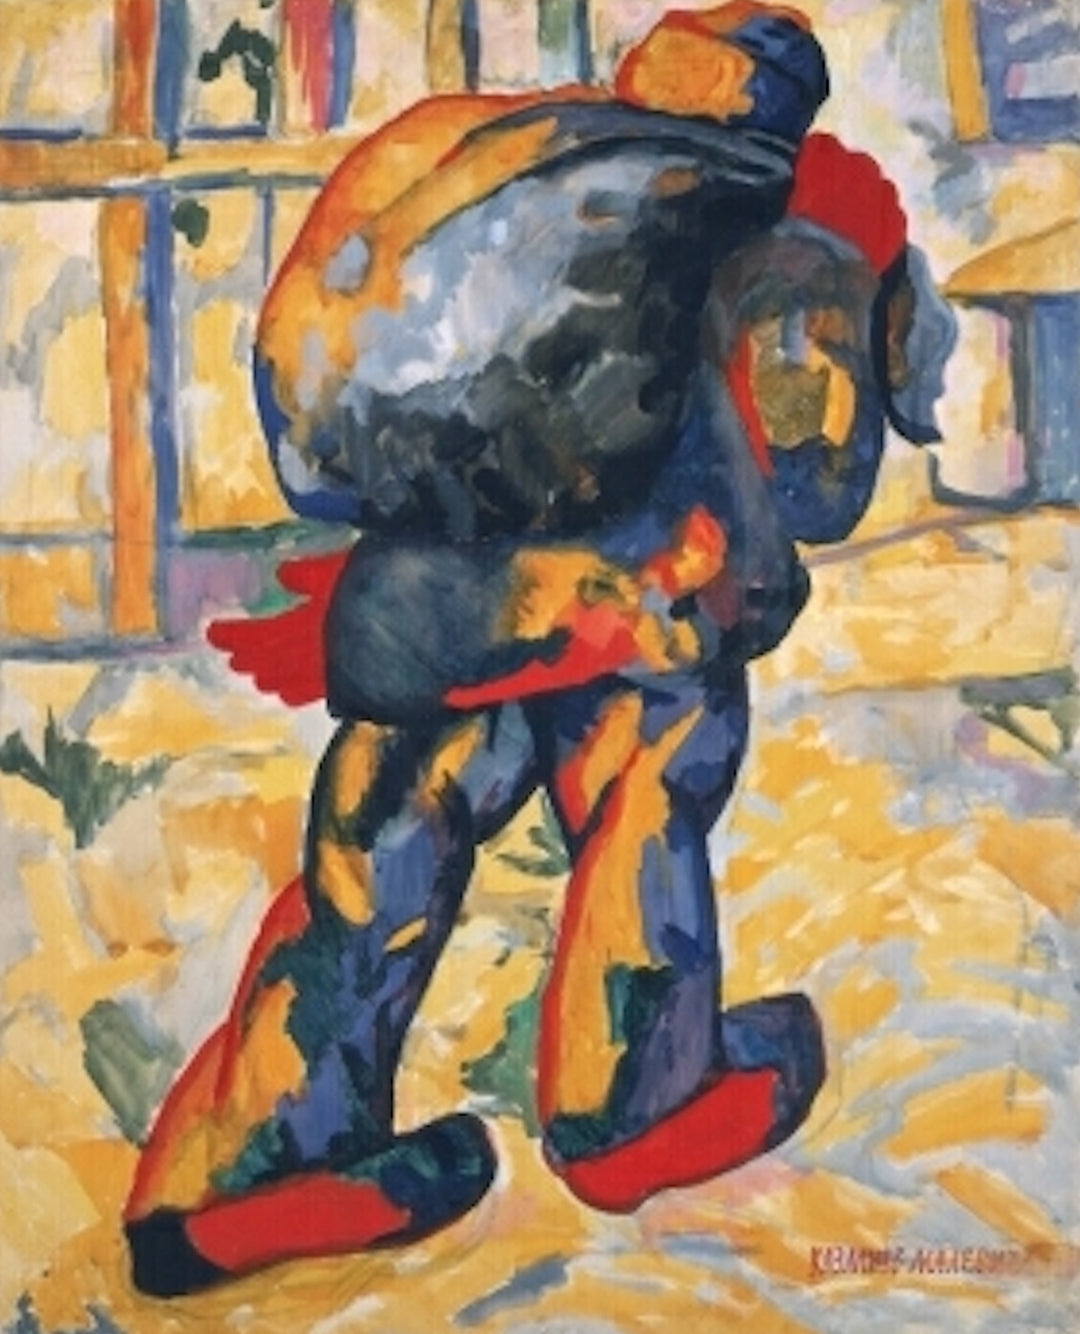 Man with Sack Painting by Kazimir Malevich